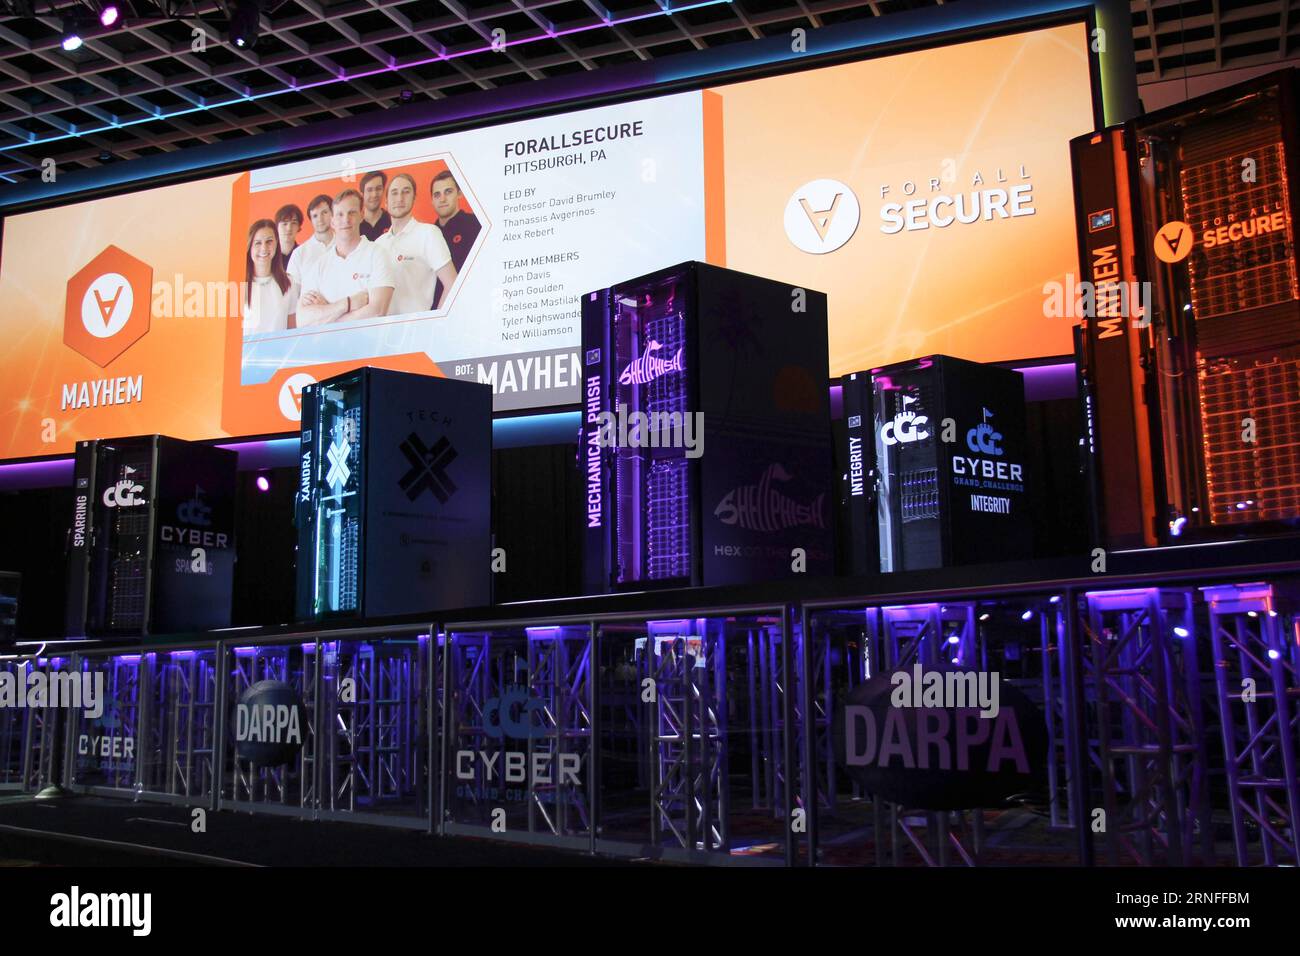 (160805) -- LAS VEGAS, Aug. 5, 2016 -- Photo taken on Aug. 4, 2016 shows the scene of the Cyber Grand Challenge (CGC) in Las Vegas, United States. Seven high-performance computing machines developed by ethical computer hackers, academics or private-sector computer security experts were engaged in the final event of the U.S. Defense Advanced Research Projects Agency (DARPA) s CGC, the world s first all-machine hacking tournament. The winning CGC system will be invited to compete against the world s best human hackers in DEF CON s annual Capture the Flag (CTF) competition on Friday. DEF CON, one Stock Photo